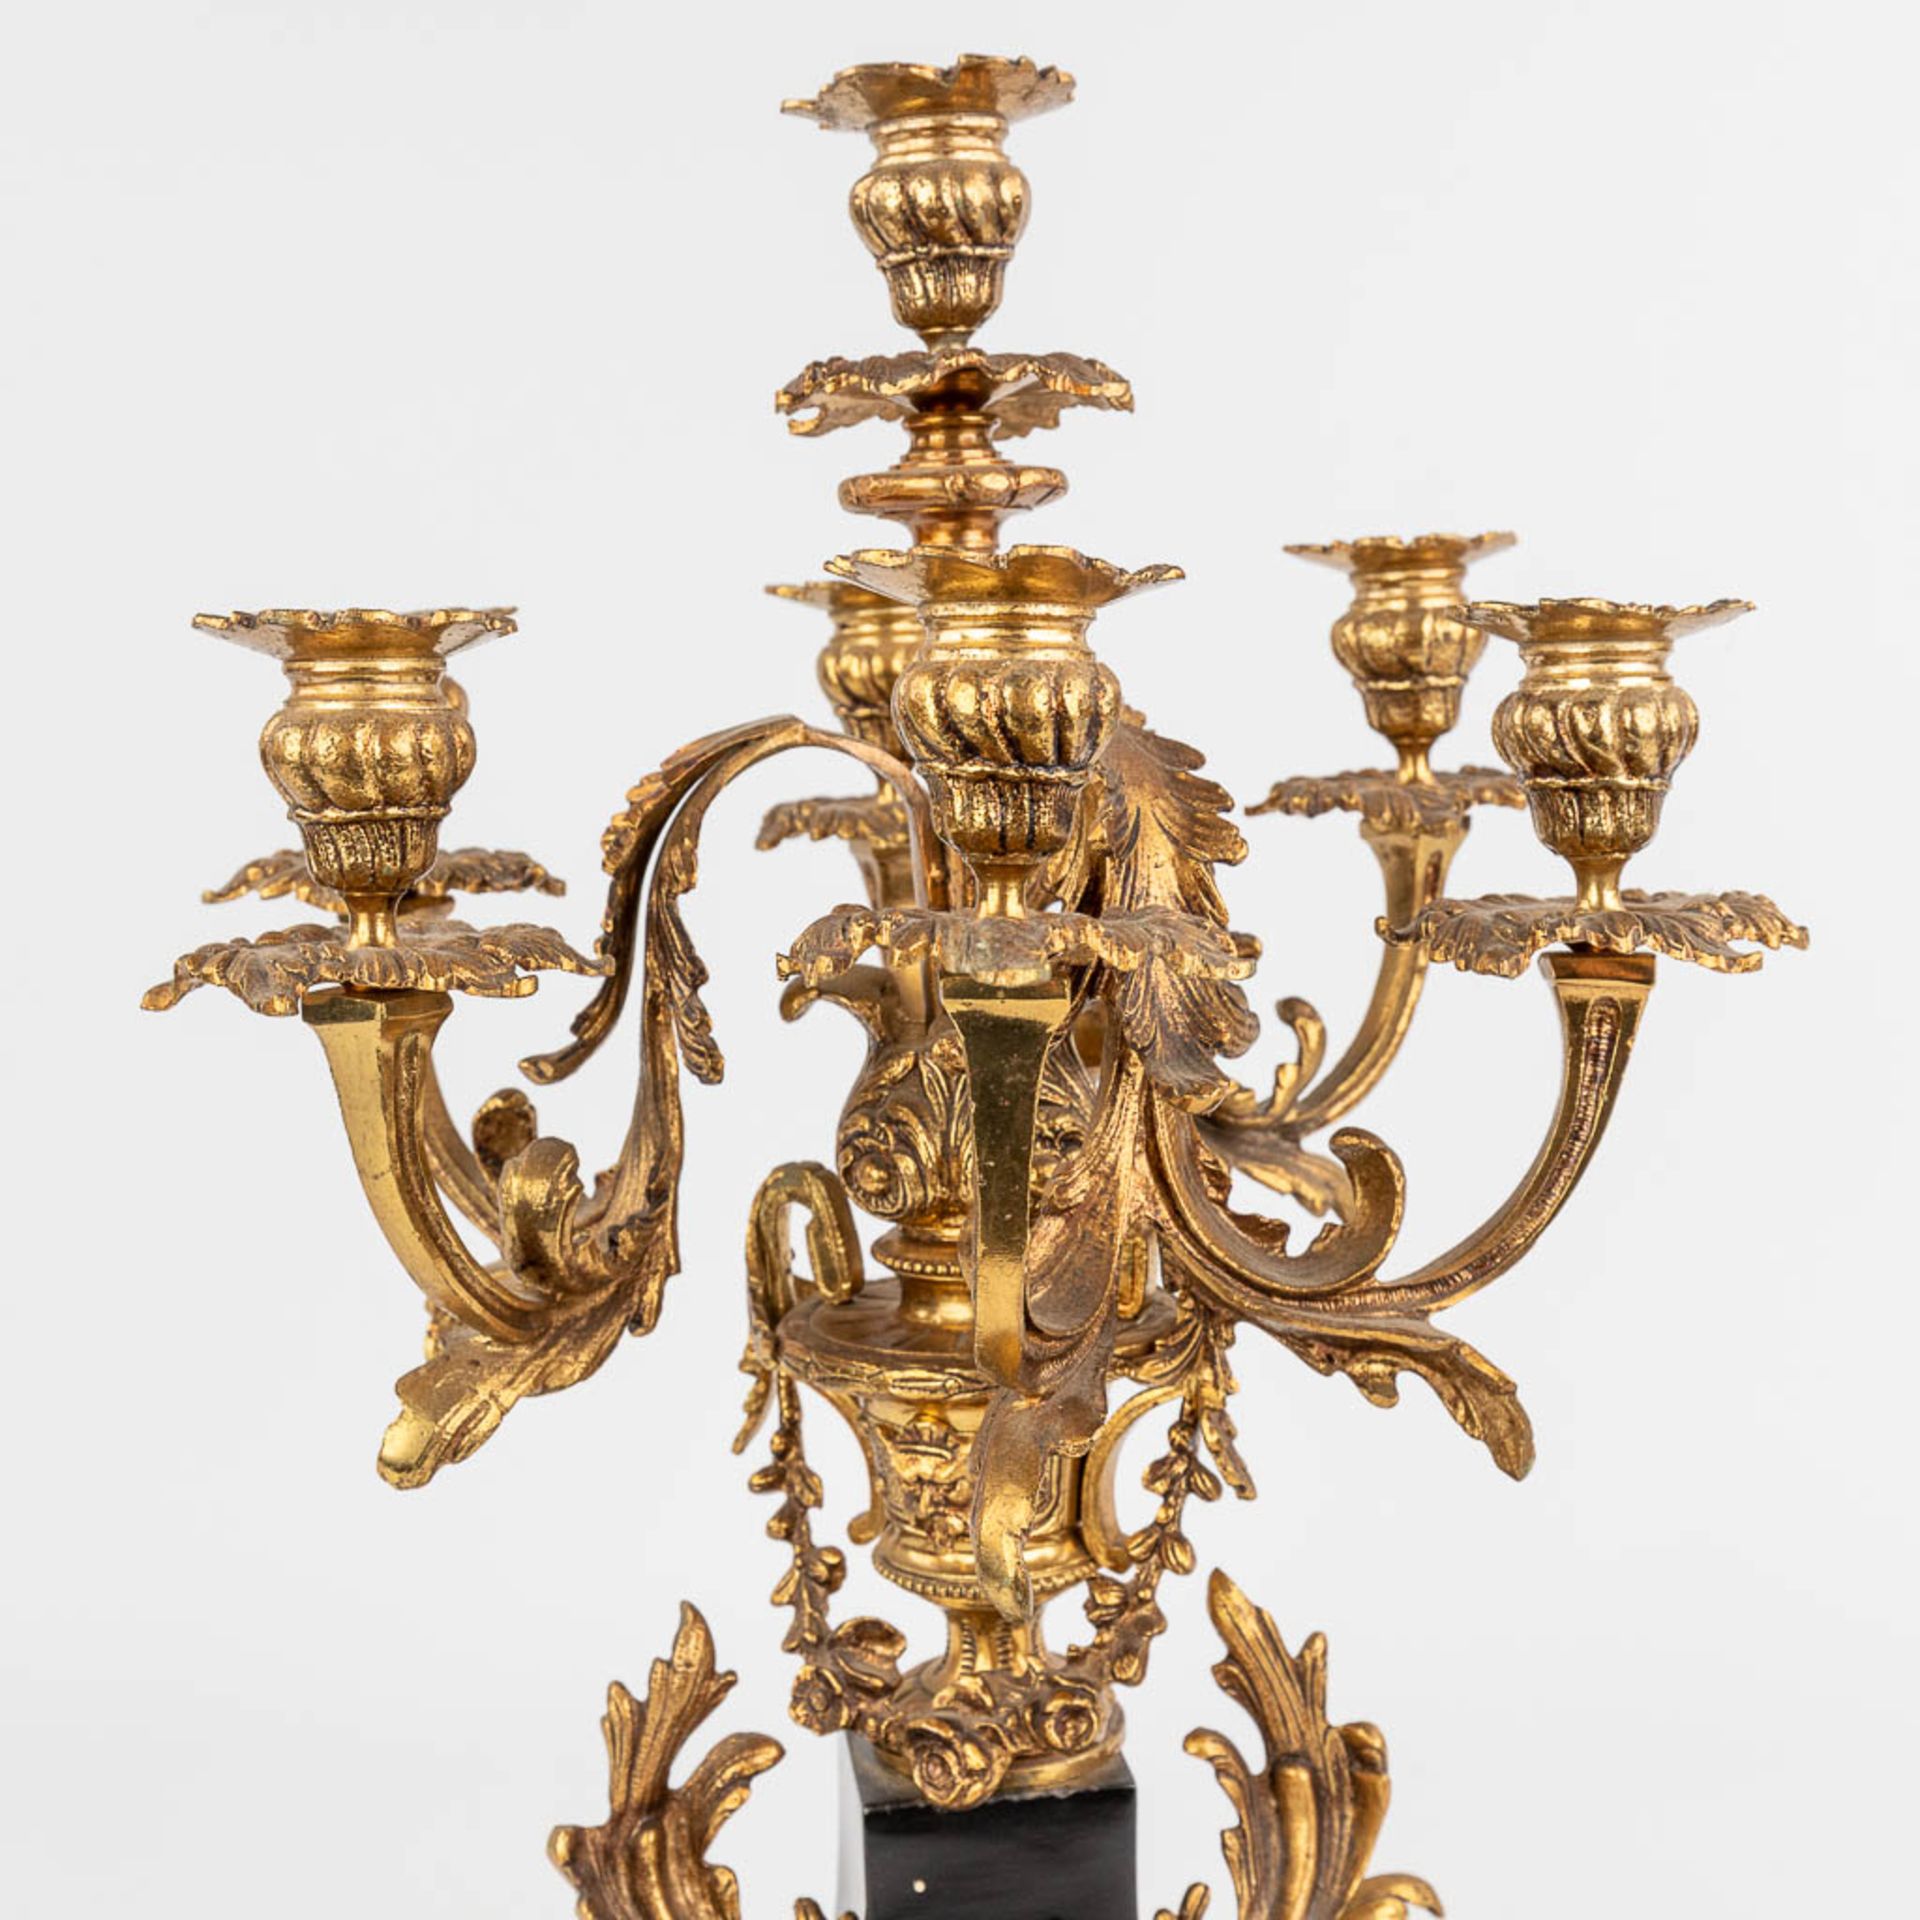 A three-piece mantle garniture clock and candelabra, Louis XV style. Circa 1970. (D:25 x W:51 x H:55 - Image 12 of 14